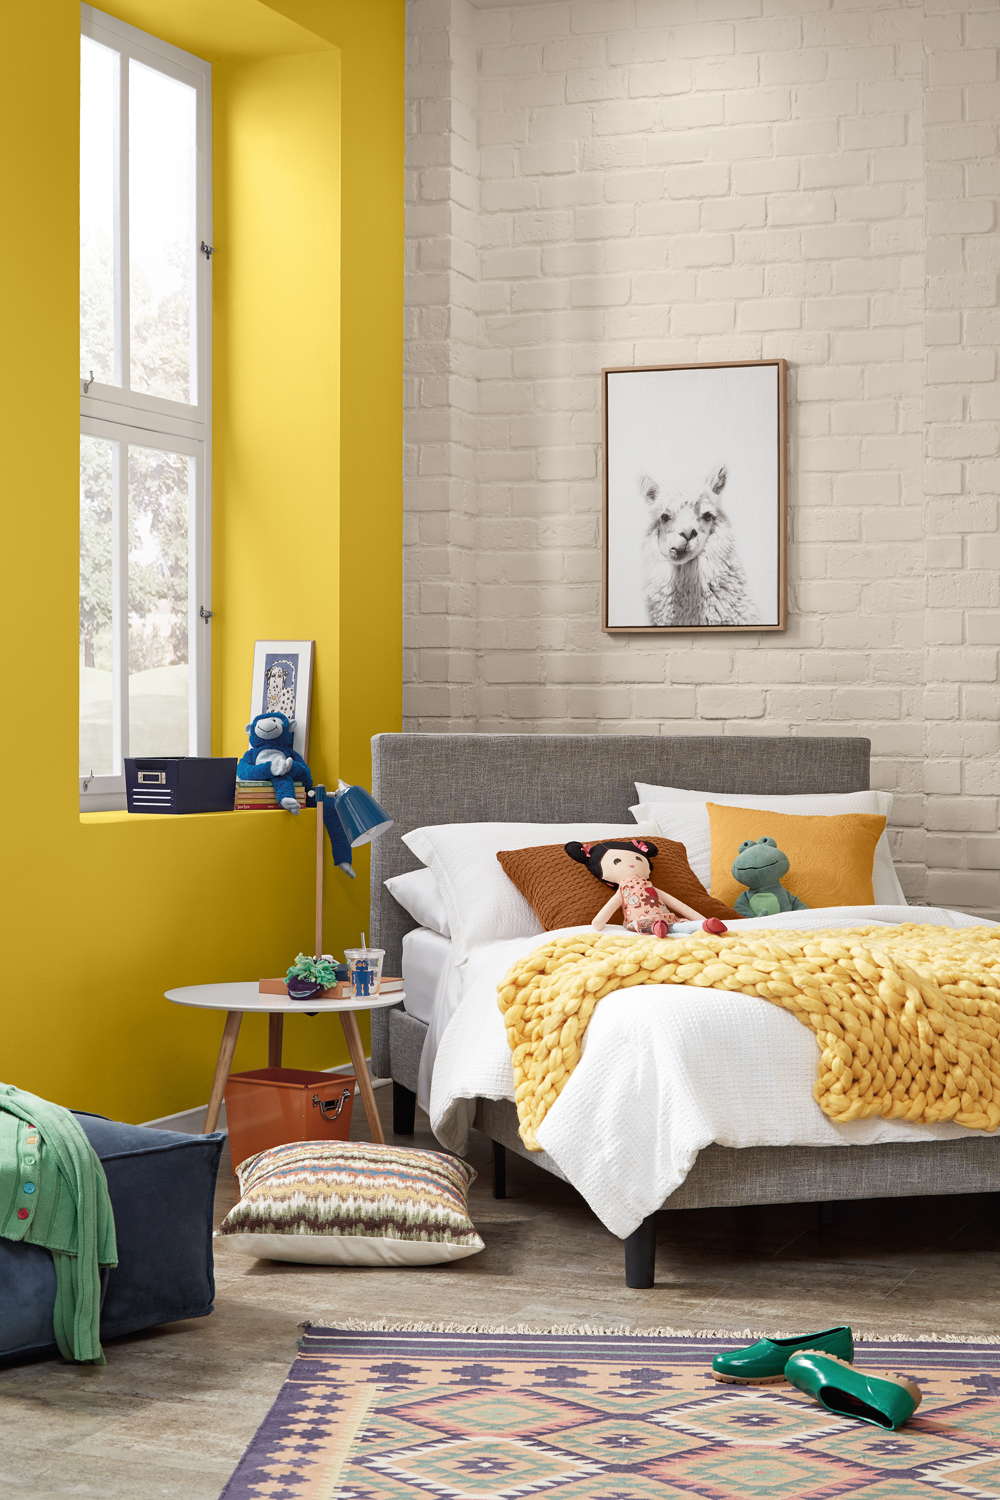 A cozy bedroom with a brick wall and a yellow accent wall